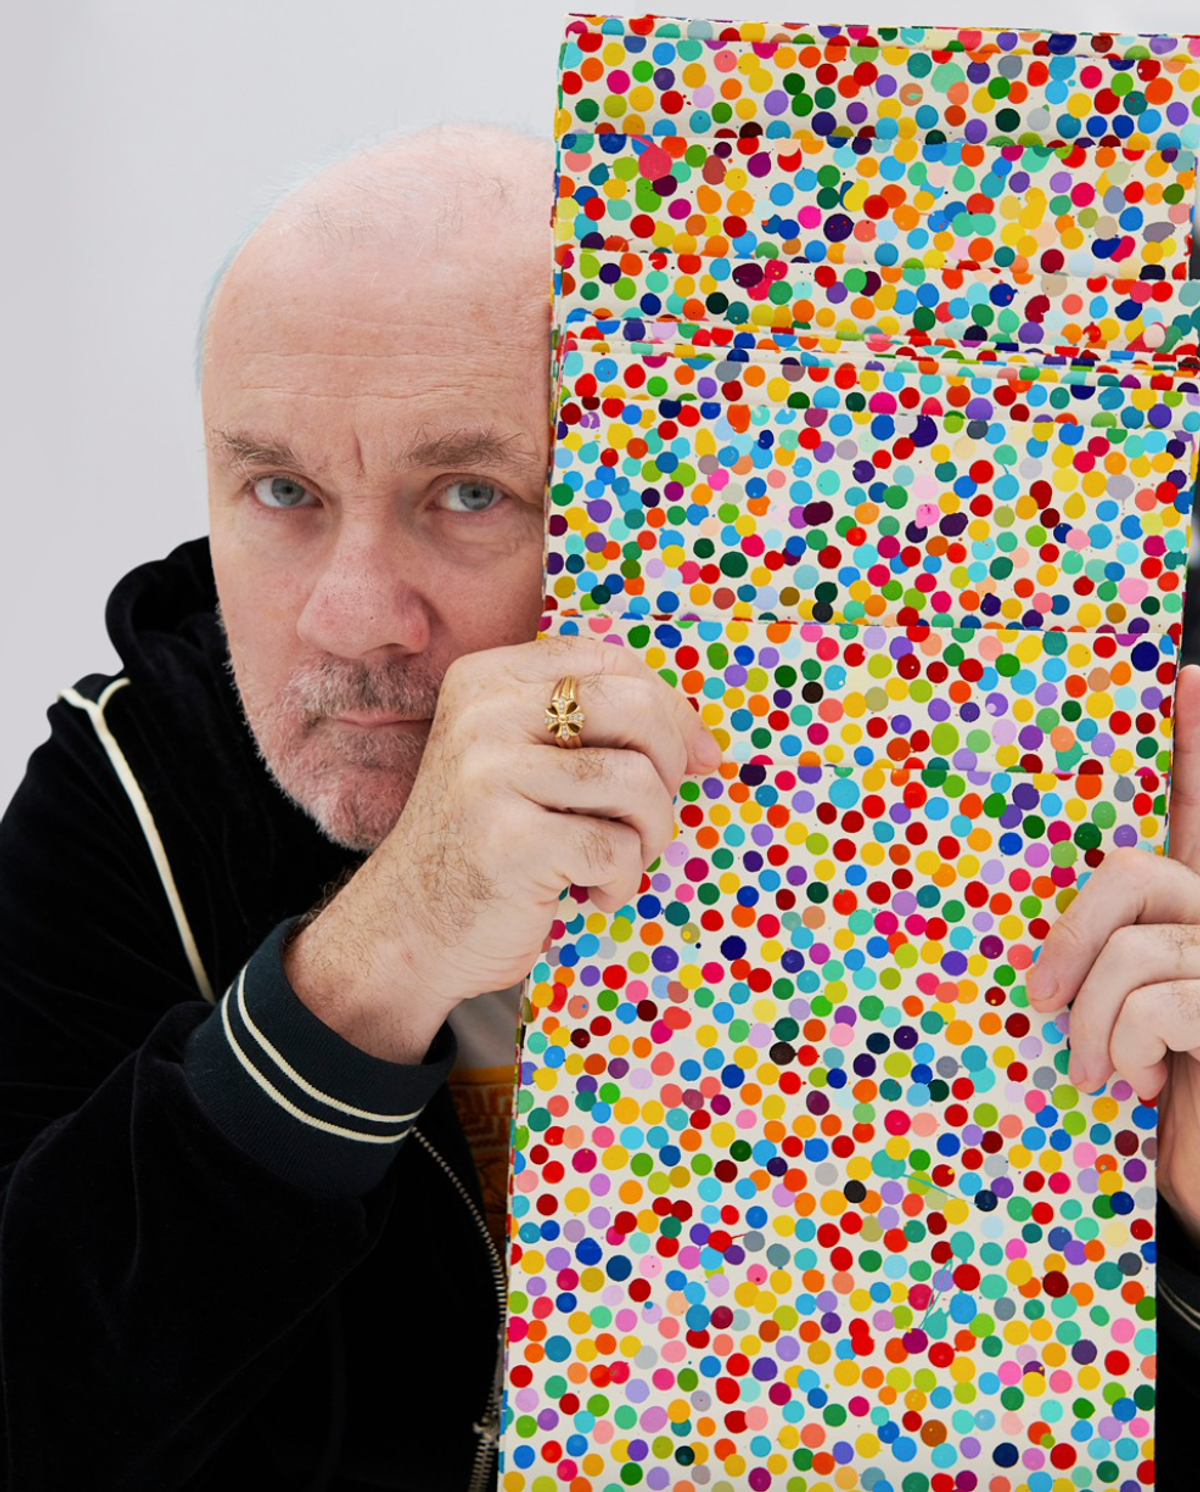 Works from Damien's Hirst's The Currency dated to 2016 have been revealed to have been made in 2018-19 

© Damien Hirst and Science Ltd, DACS 2021. Photo: Prudence Cuming Associates Ltd